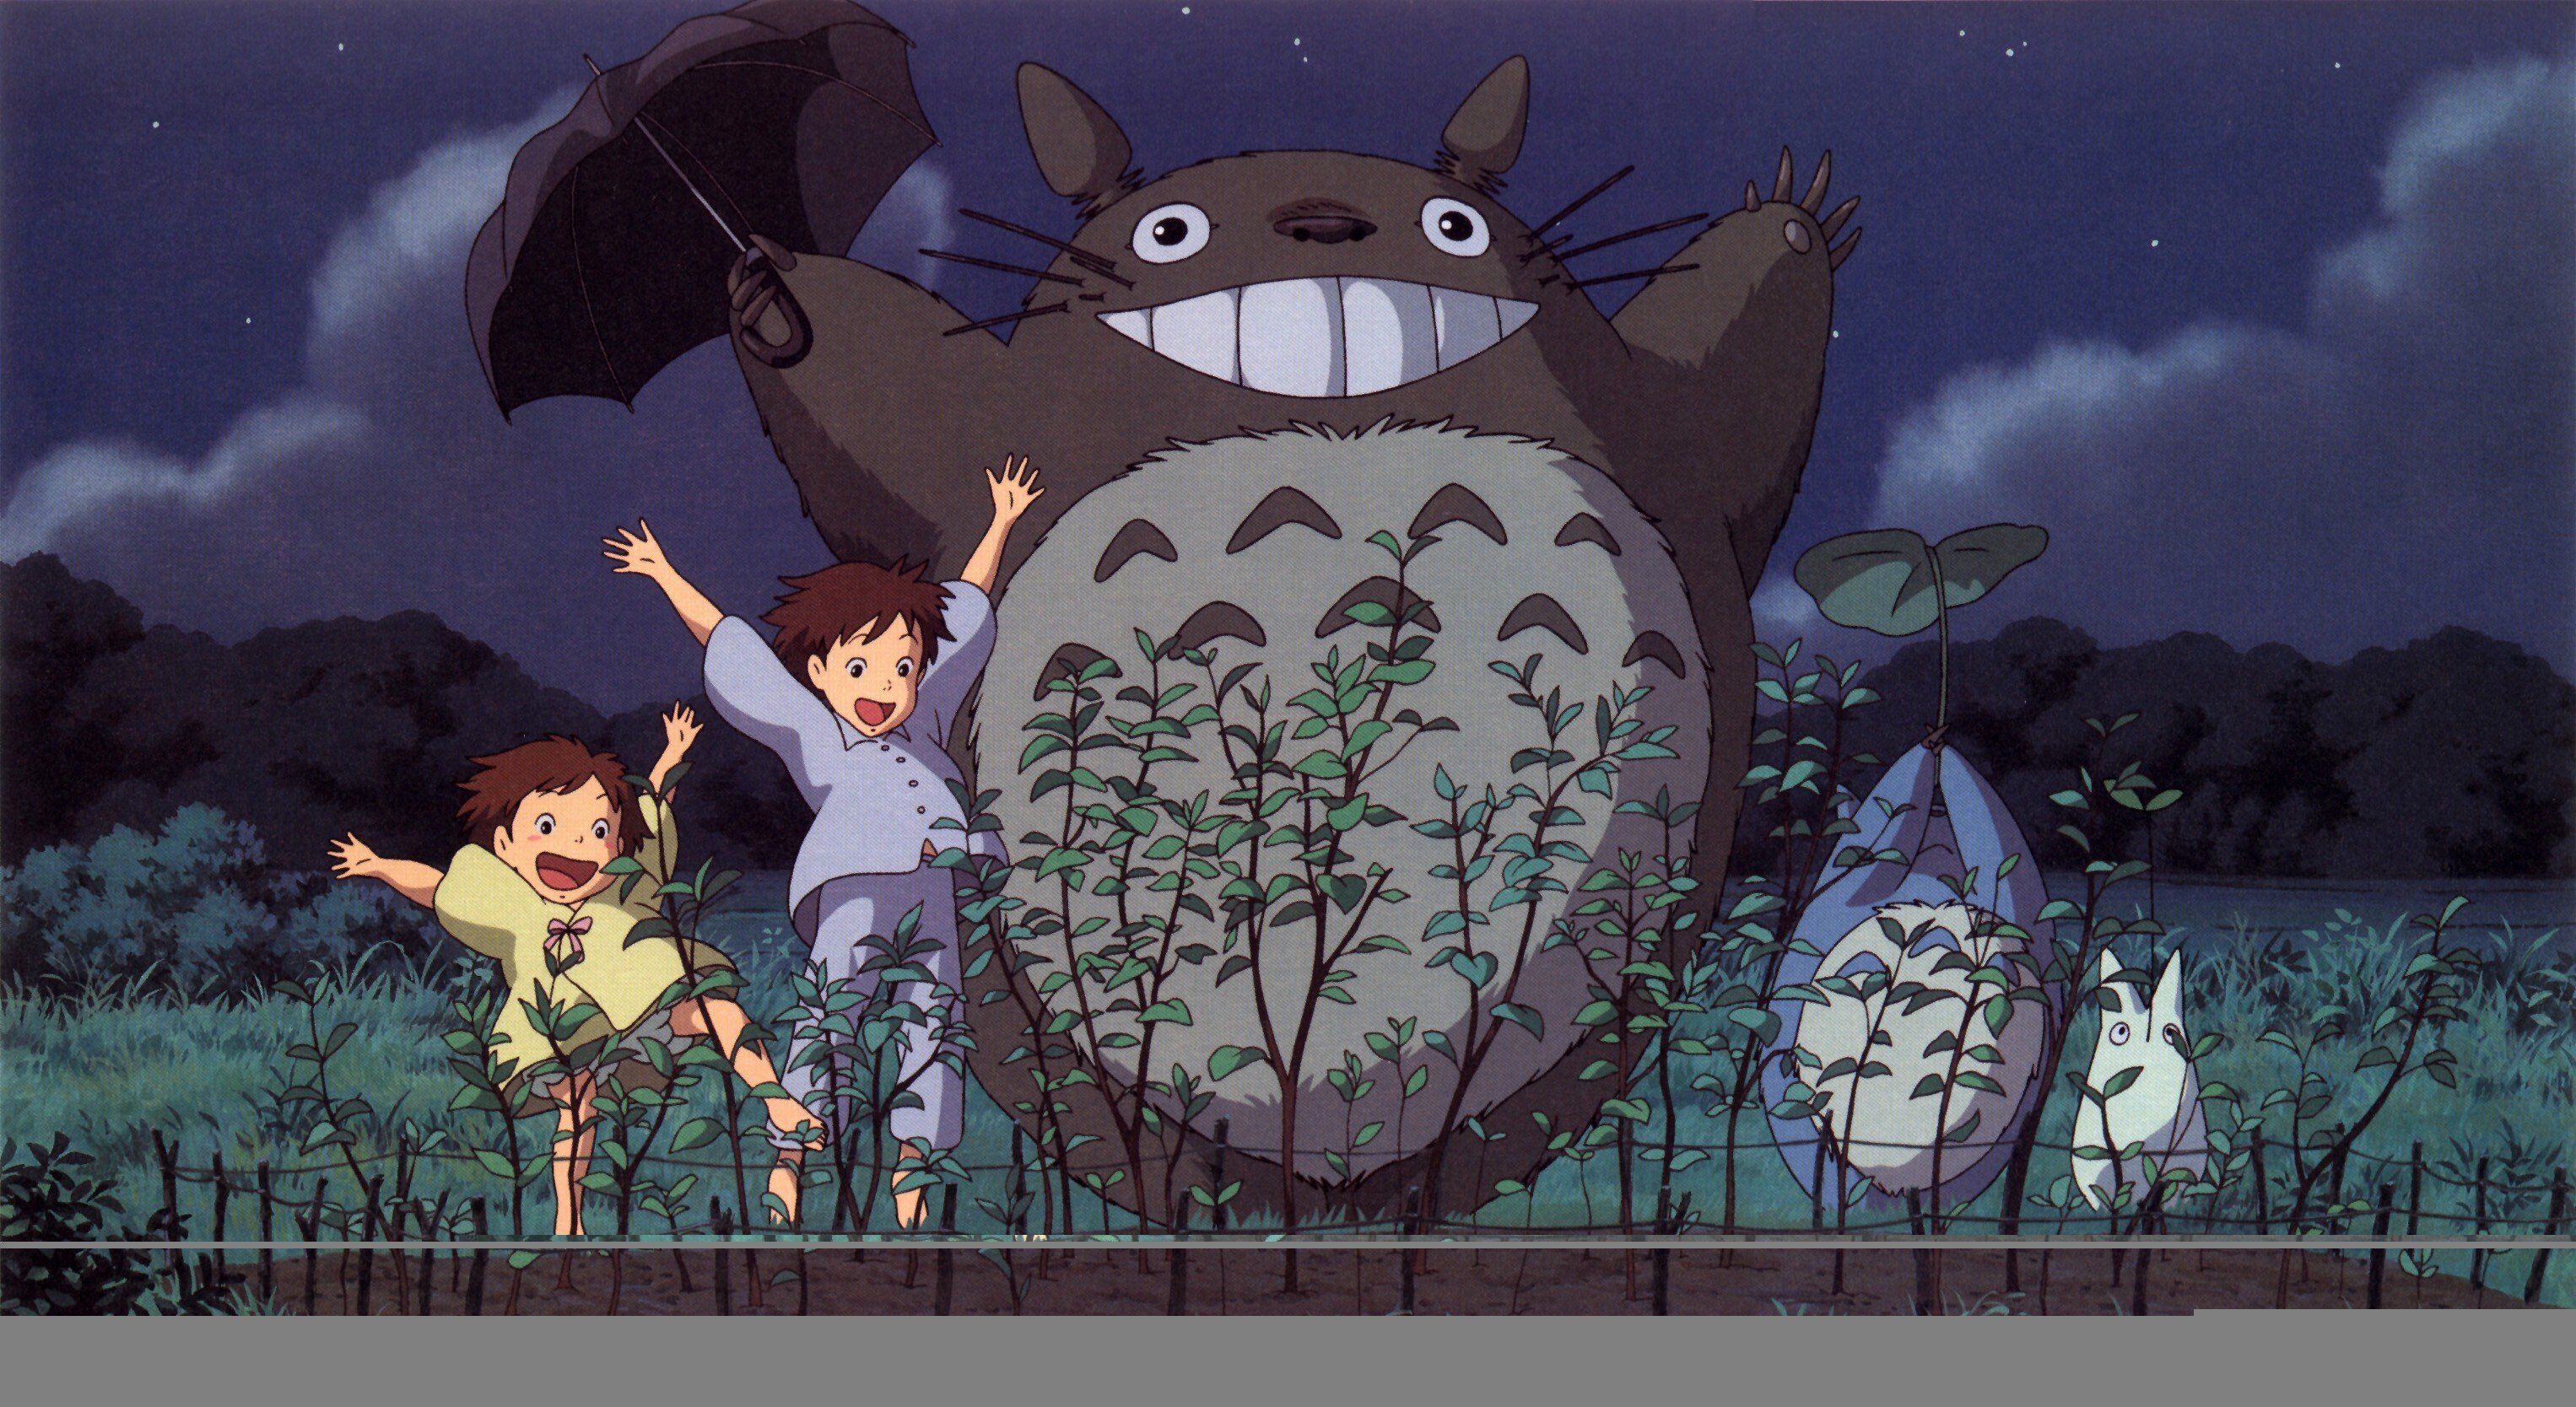 A still from My Neighbor Totoro (1988), written and directed by Hayao Miyazaki. It will be one of 21 Studio Ghibli films released by Netflix from next month. Photo: Studio Ghibli